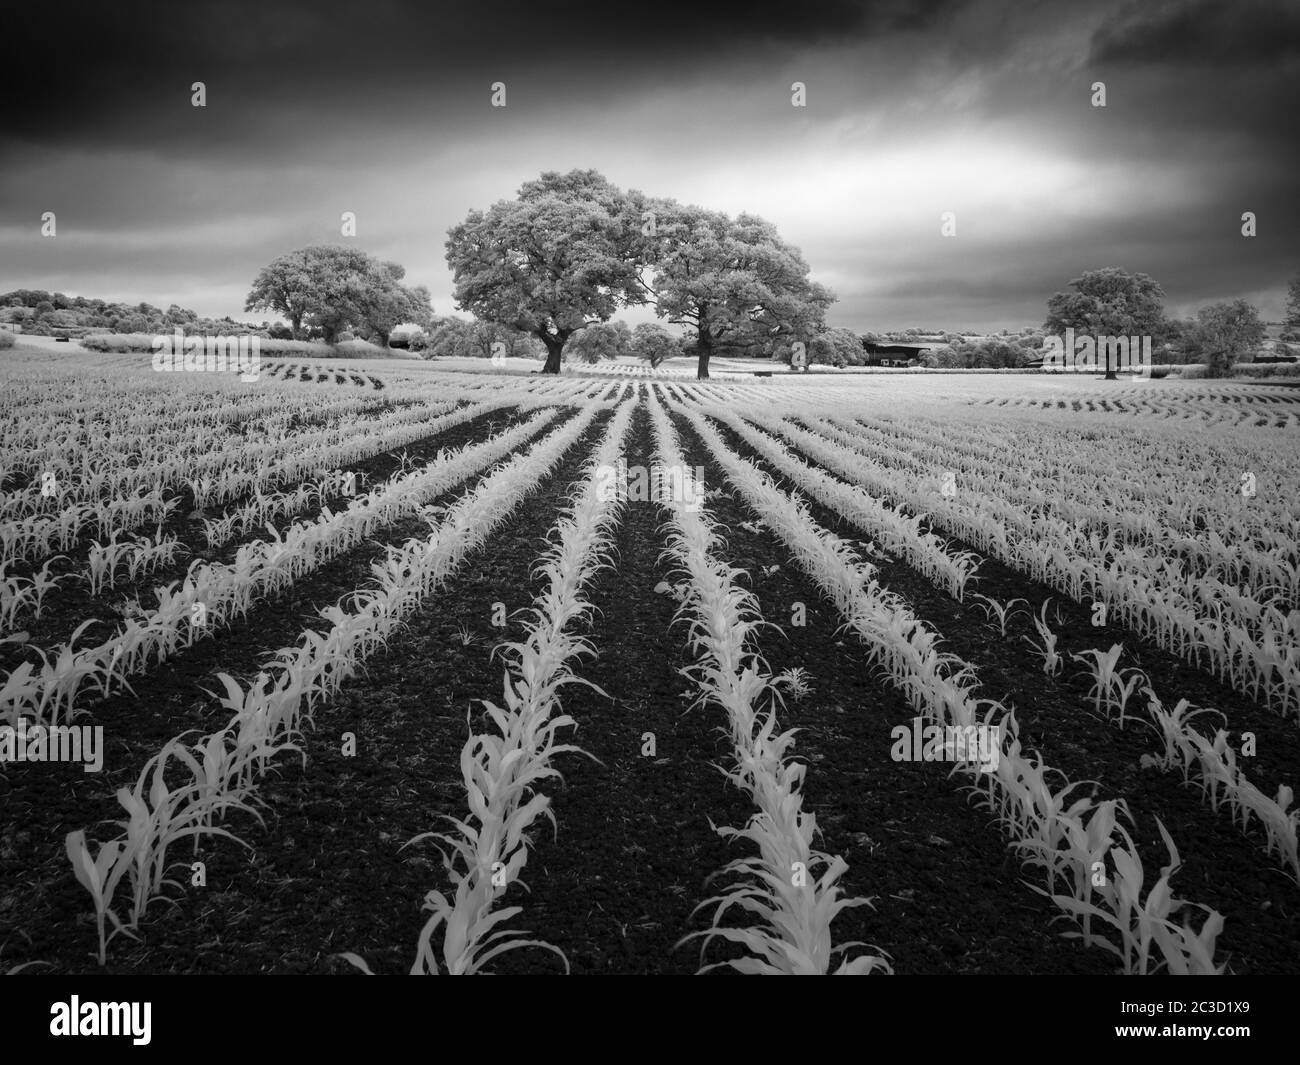 An infrared black and white image of the English countryside in summer near Wrington, North Somerset, England. Stock Photo